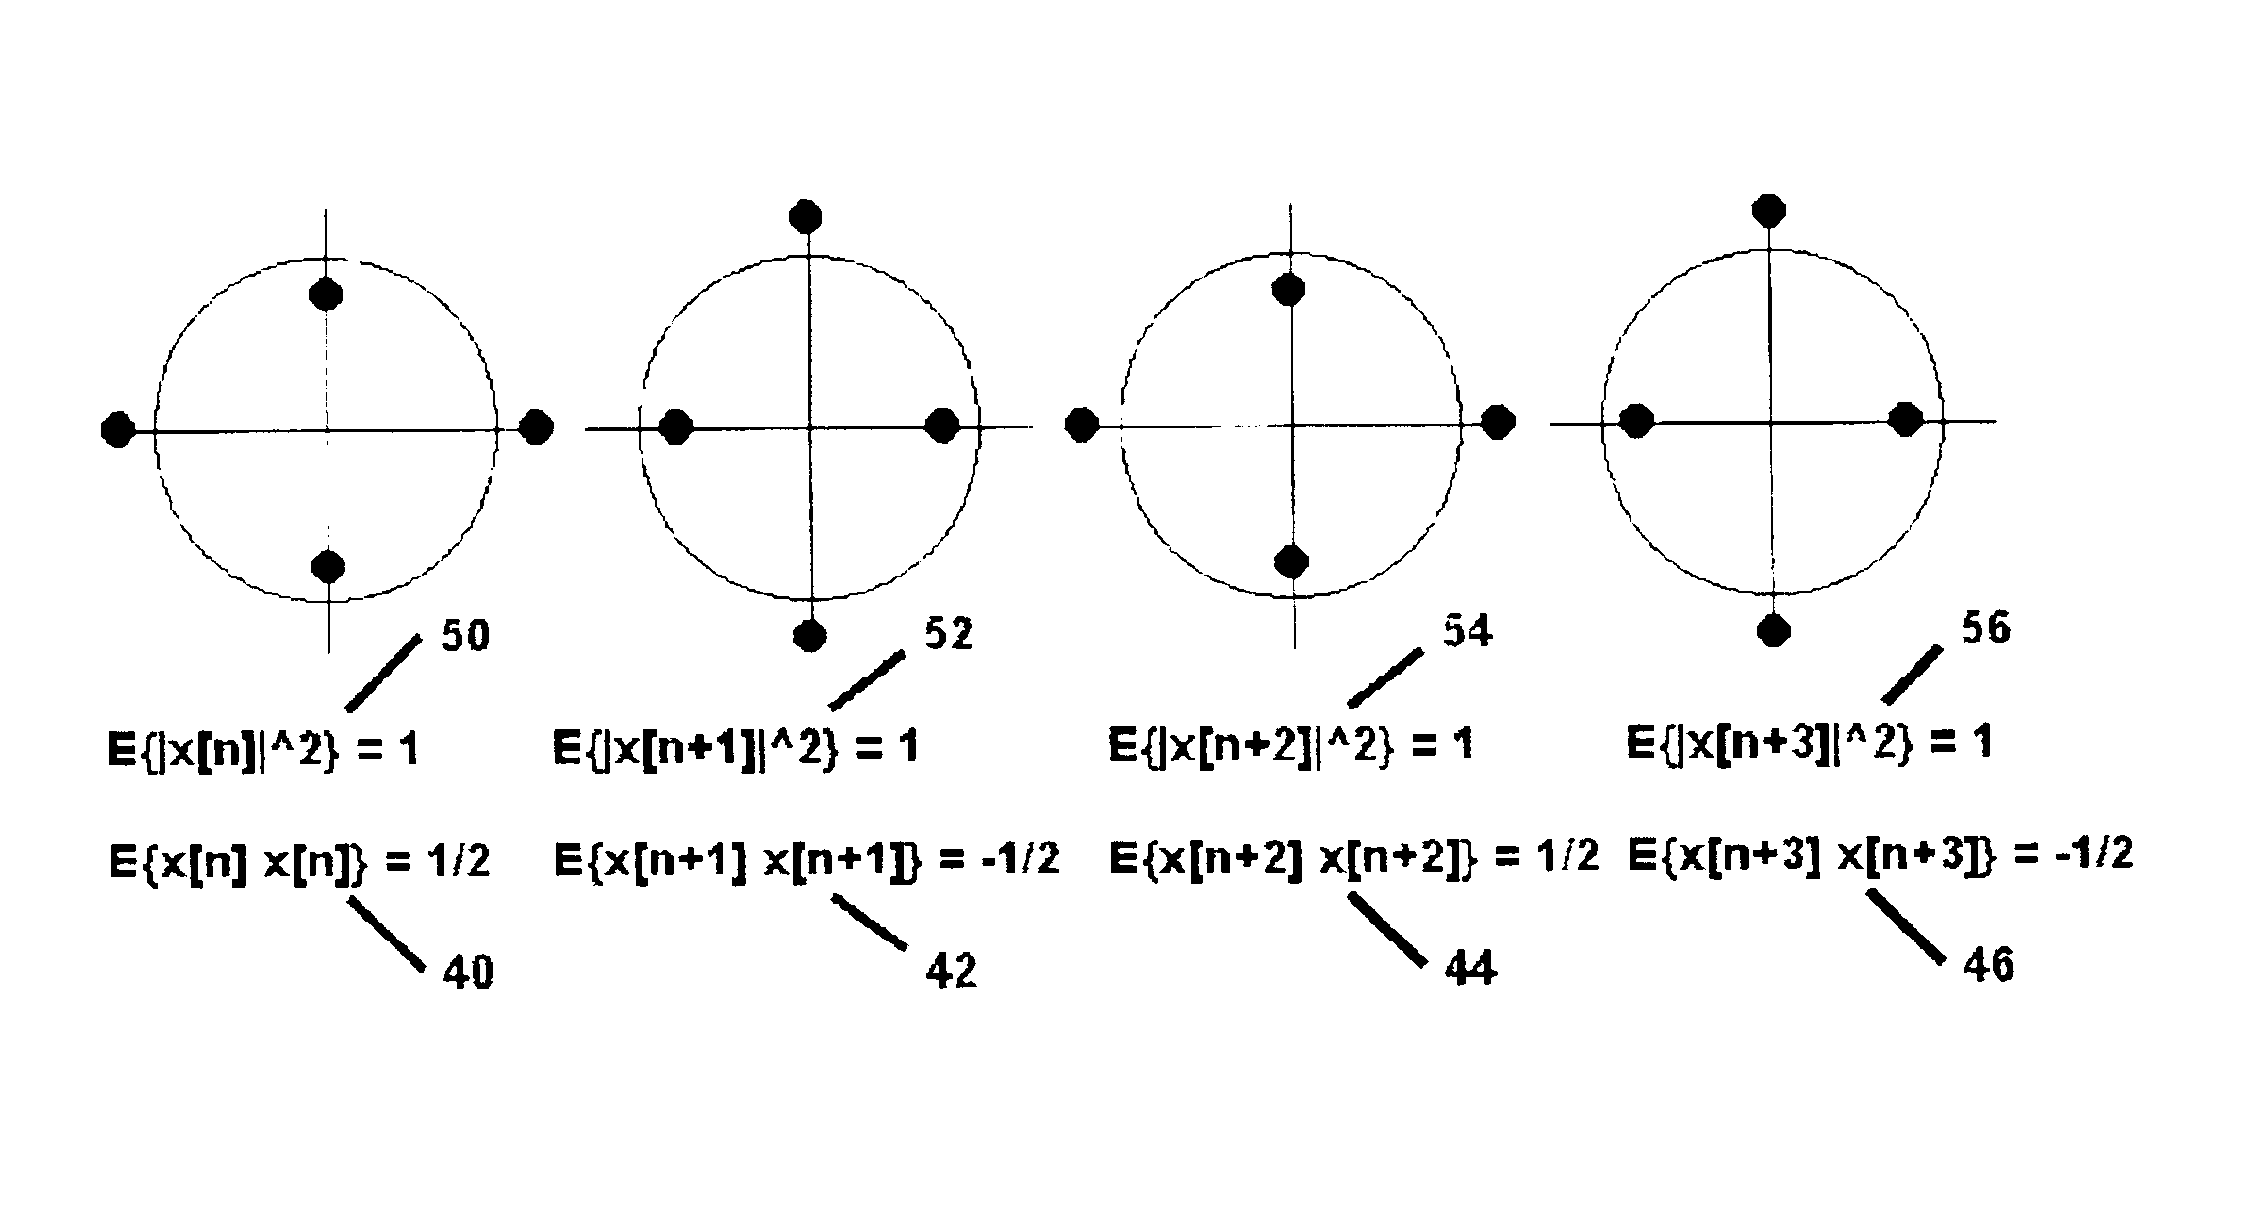 Symbol constellations having second-order statistics with cyclostationary phase